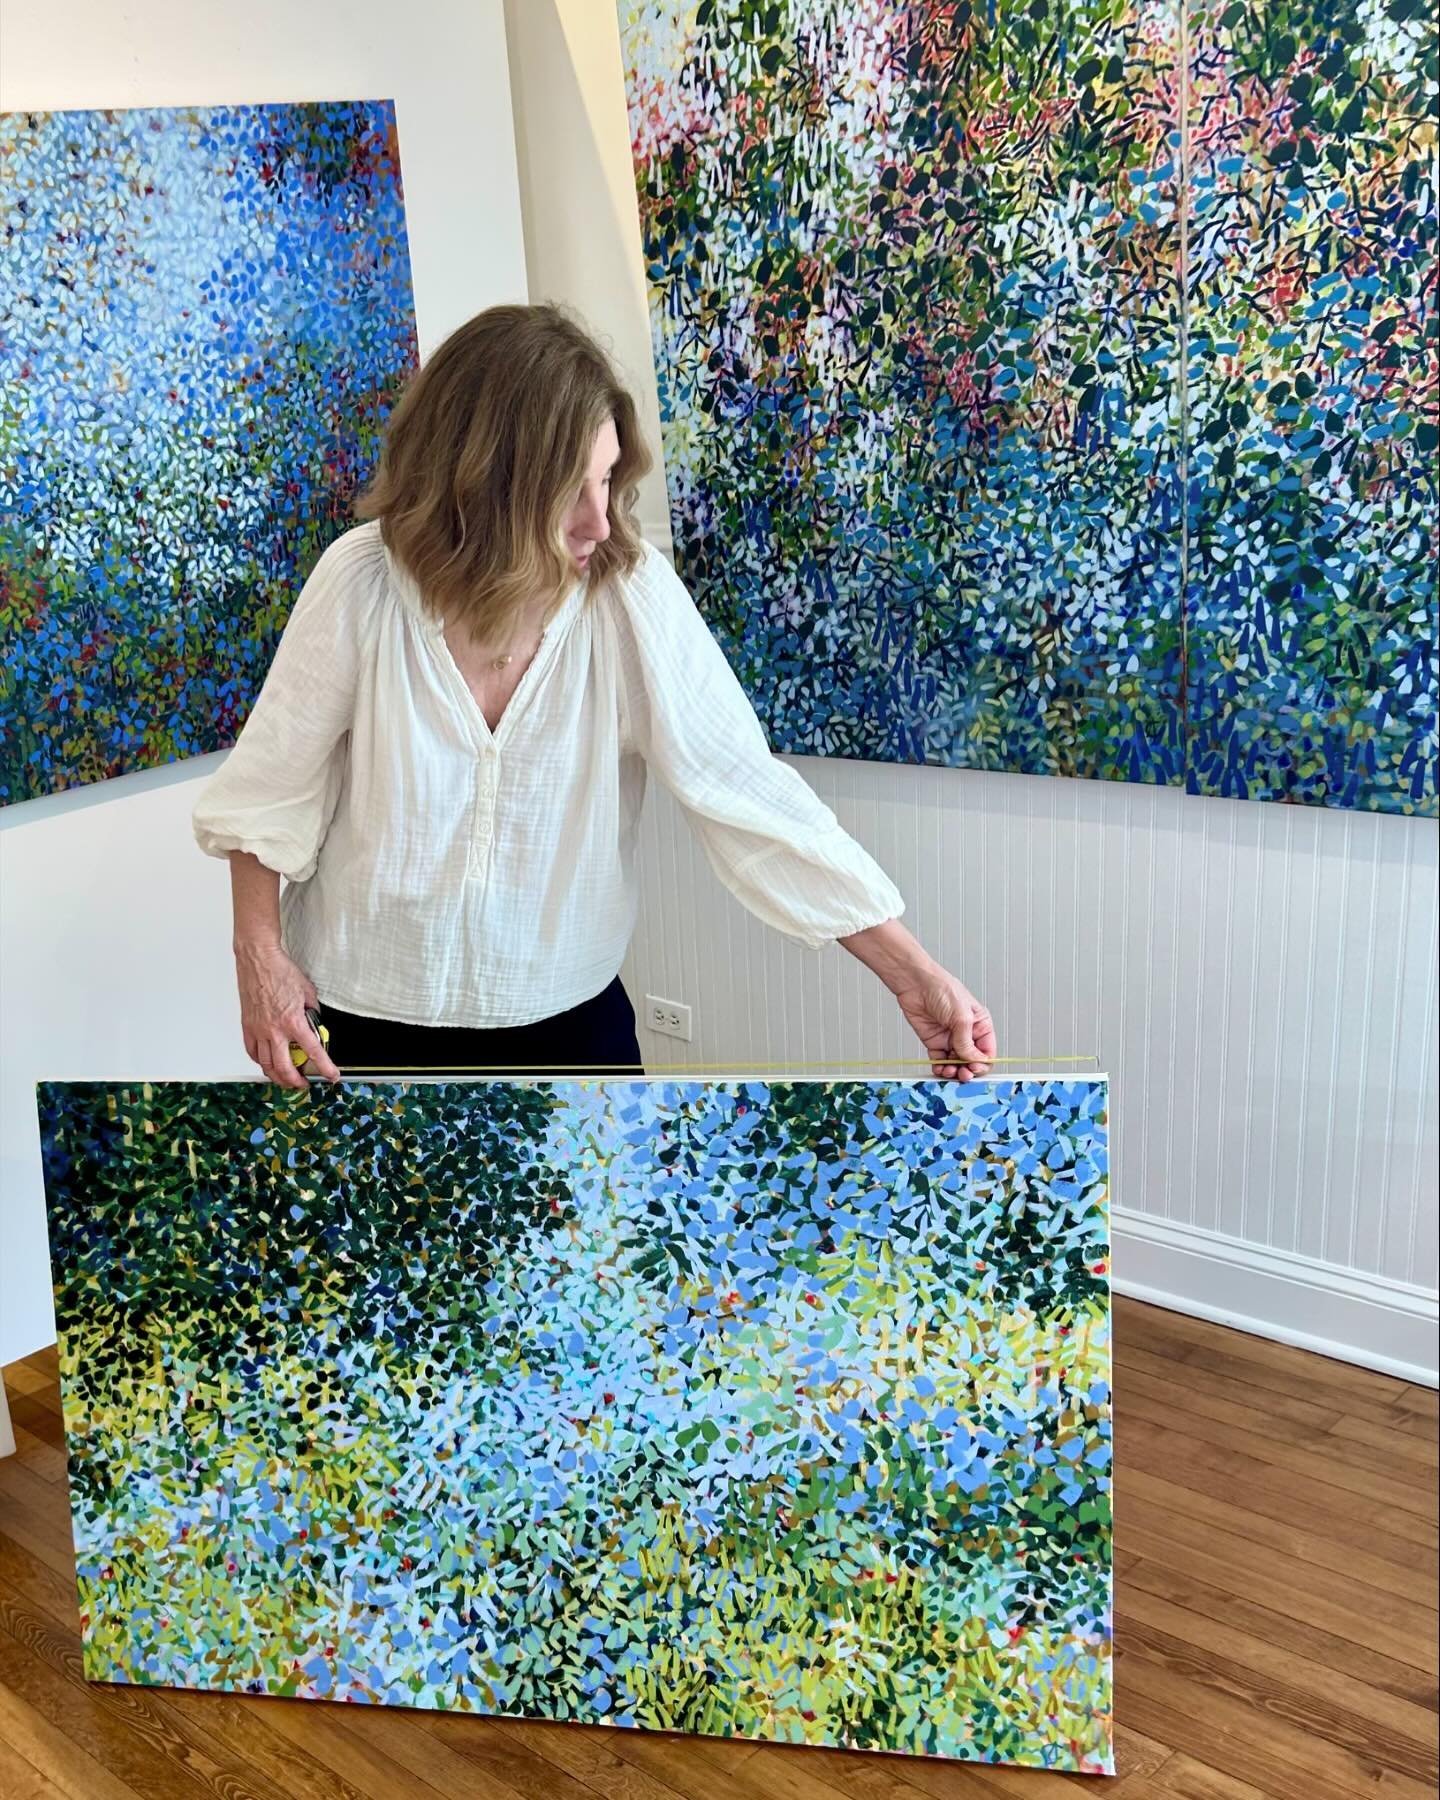 Vivid artist Amie Campbell dropped off her new work today, and we&rsquo;ve been busy getting it ready for this month and, maybe more importantly, the opening! We look forward to seeing you tomorrow night from 5-7 PM! 

#FirstFriday #Newexhibit #Newsh